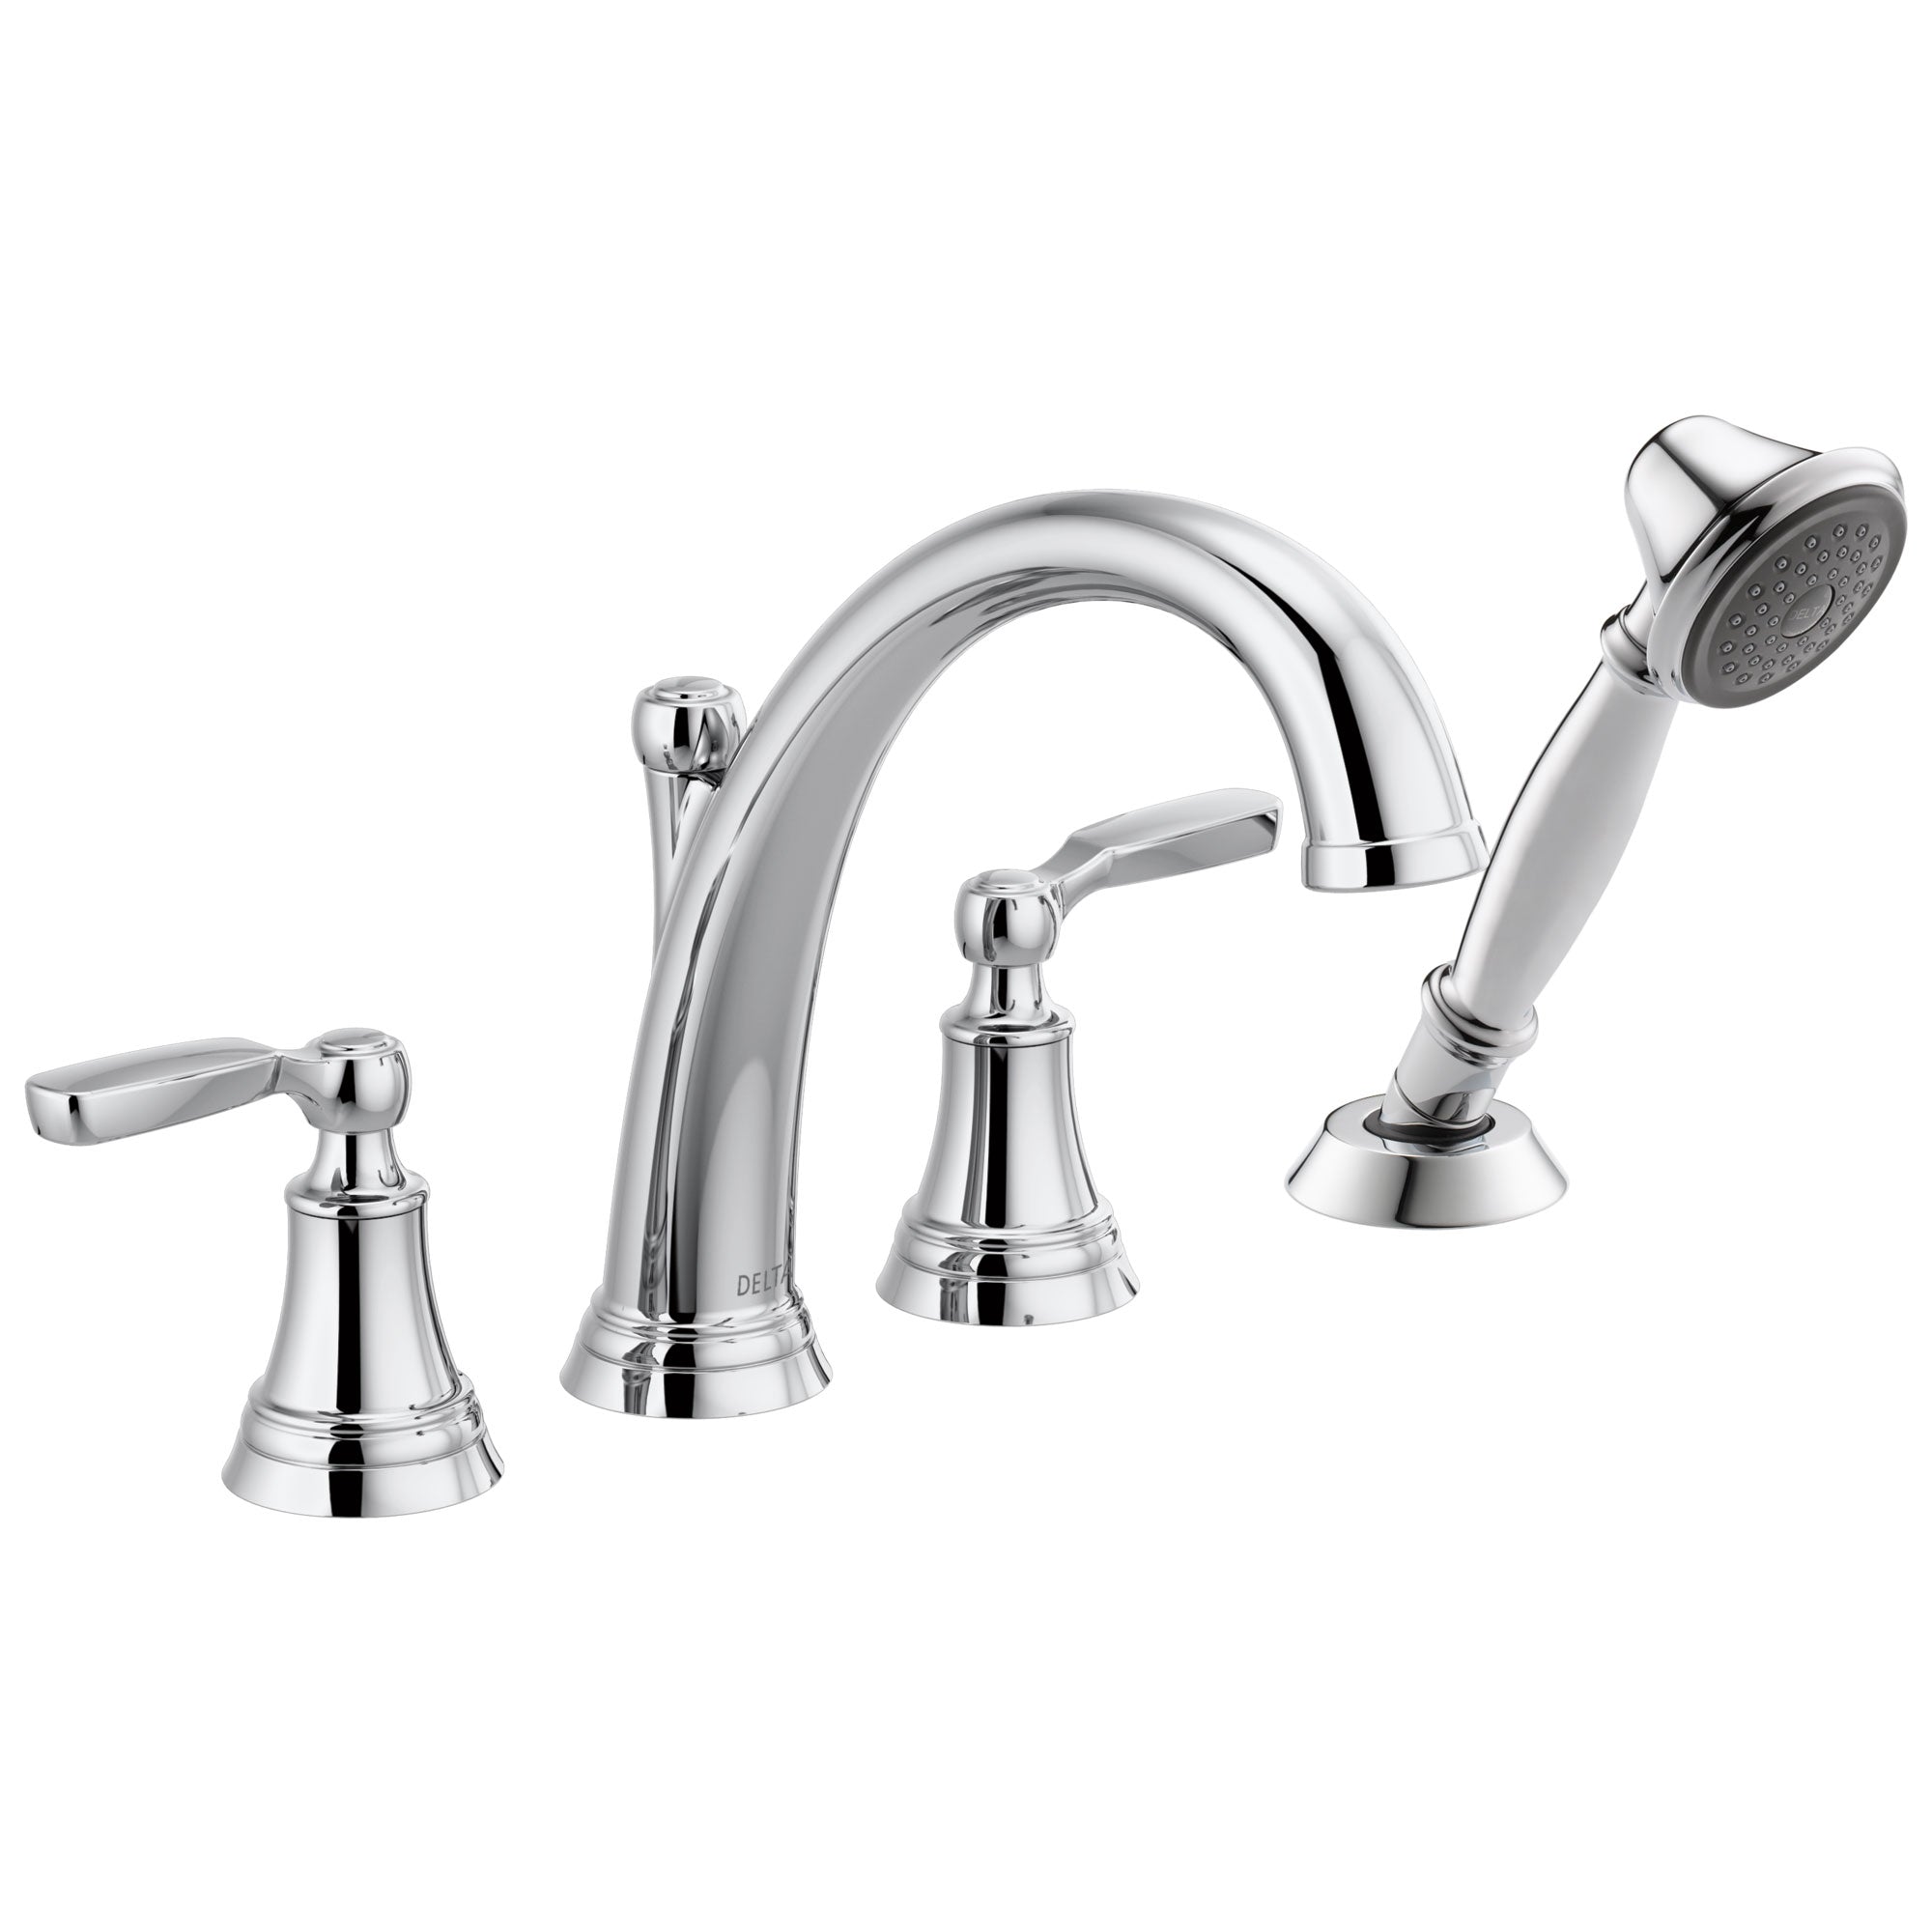 Delta Woodhurst Chrome Finish 2 Handle Roman Tub Filler Faucet with Hand Shower Includes Rough-in Valve D3054V